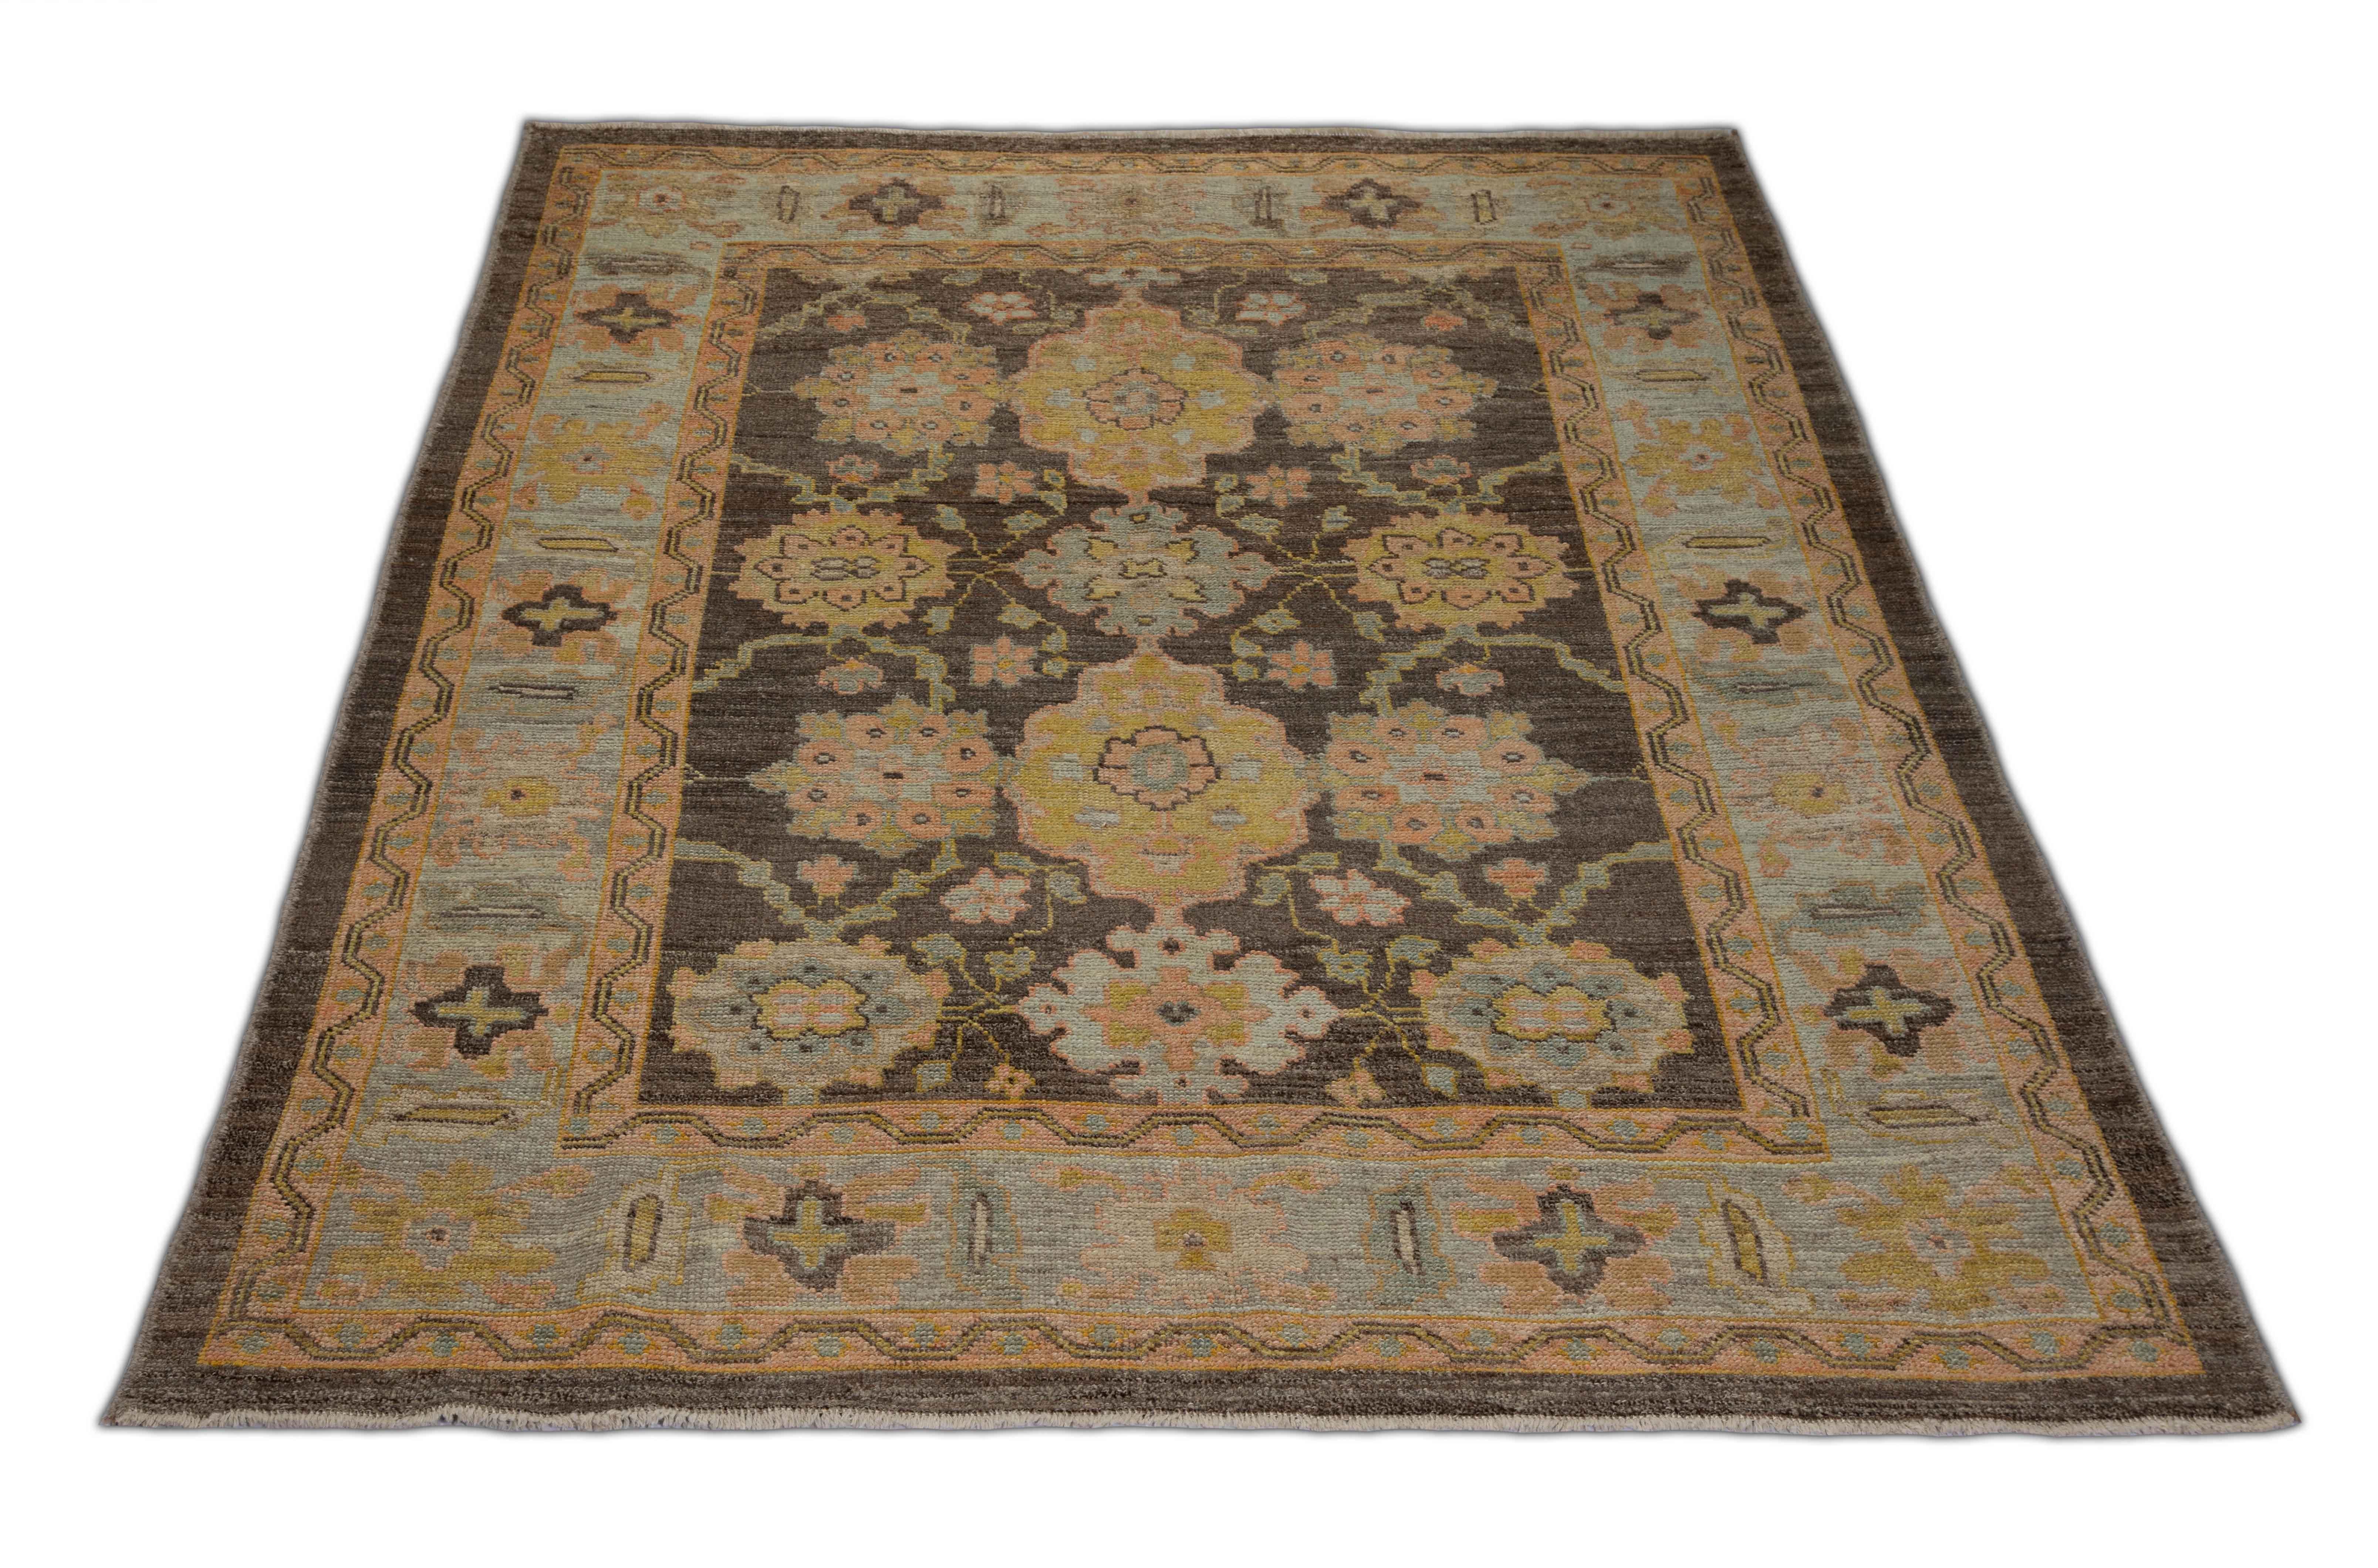 New Turkish rug made of handwoven sheep’s wool of the finest quality. It’s colored with organic vegetable dyes that are certified safe for humans and pets alike. It features a large, brown center field with flower medallions allover associated with